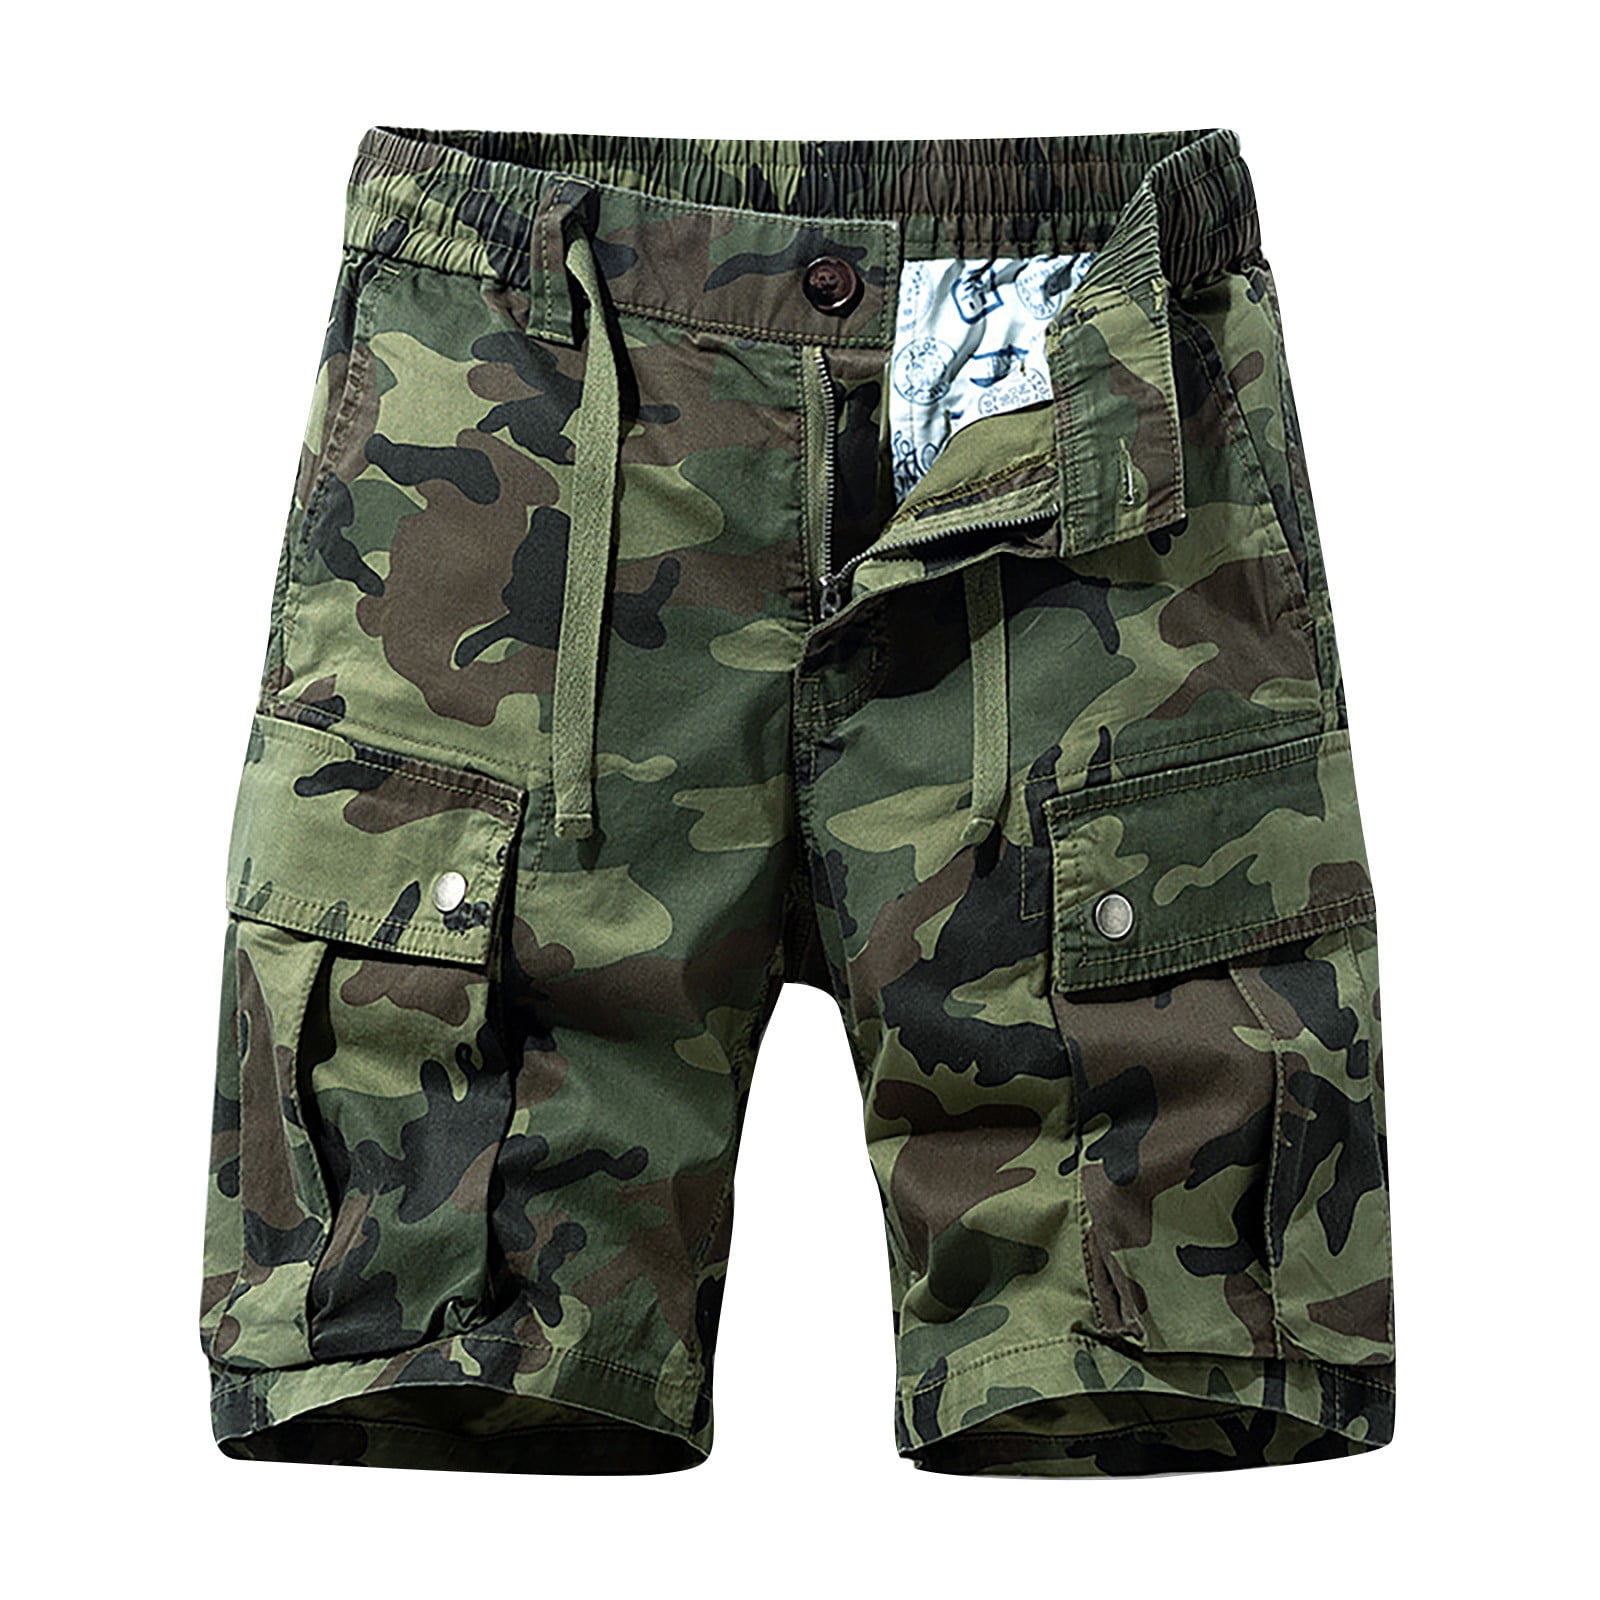 YYDGH Mens Camouflage Cargo Shorts Casual Elastic Waist